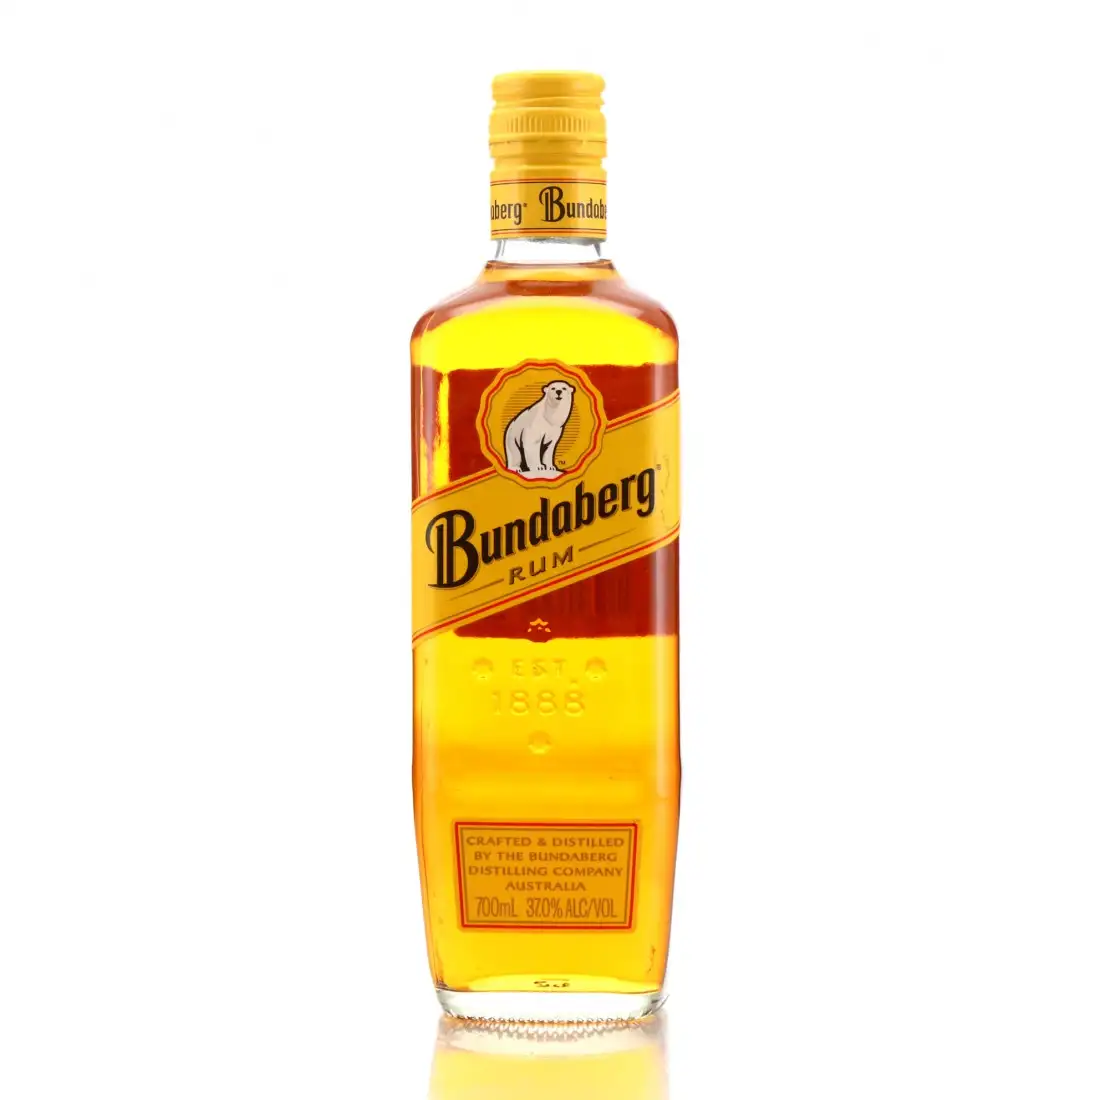 Image of the front of the bottle of the rum Original